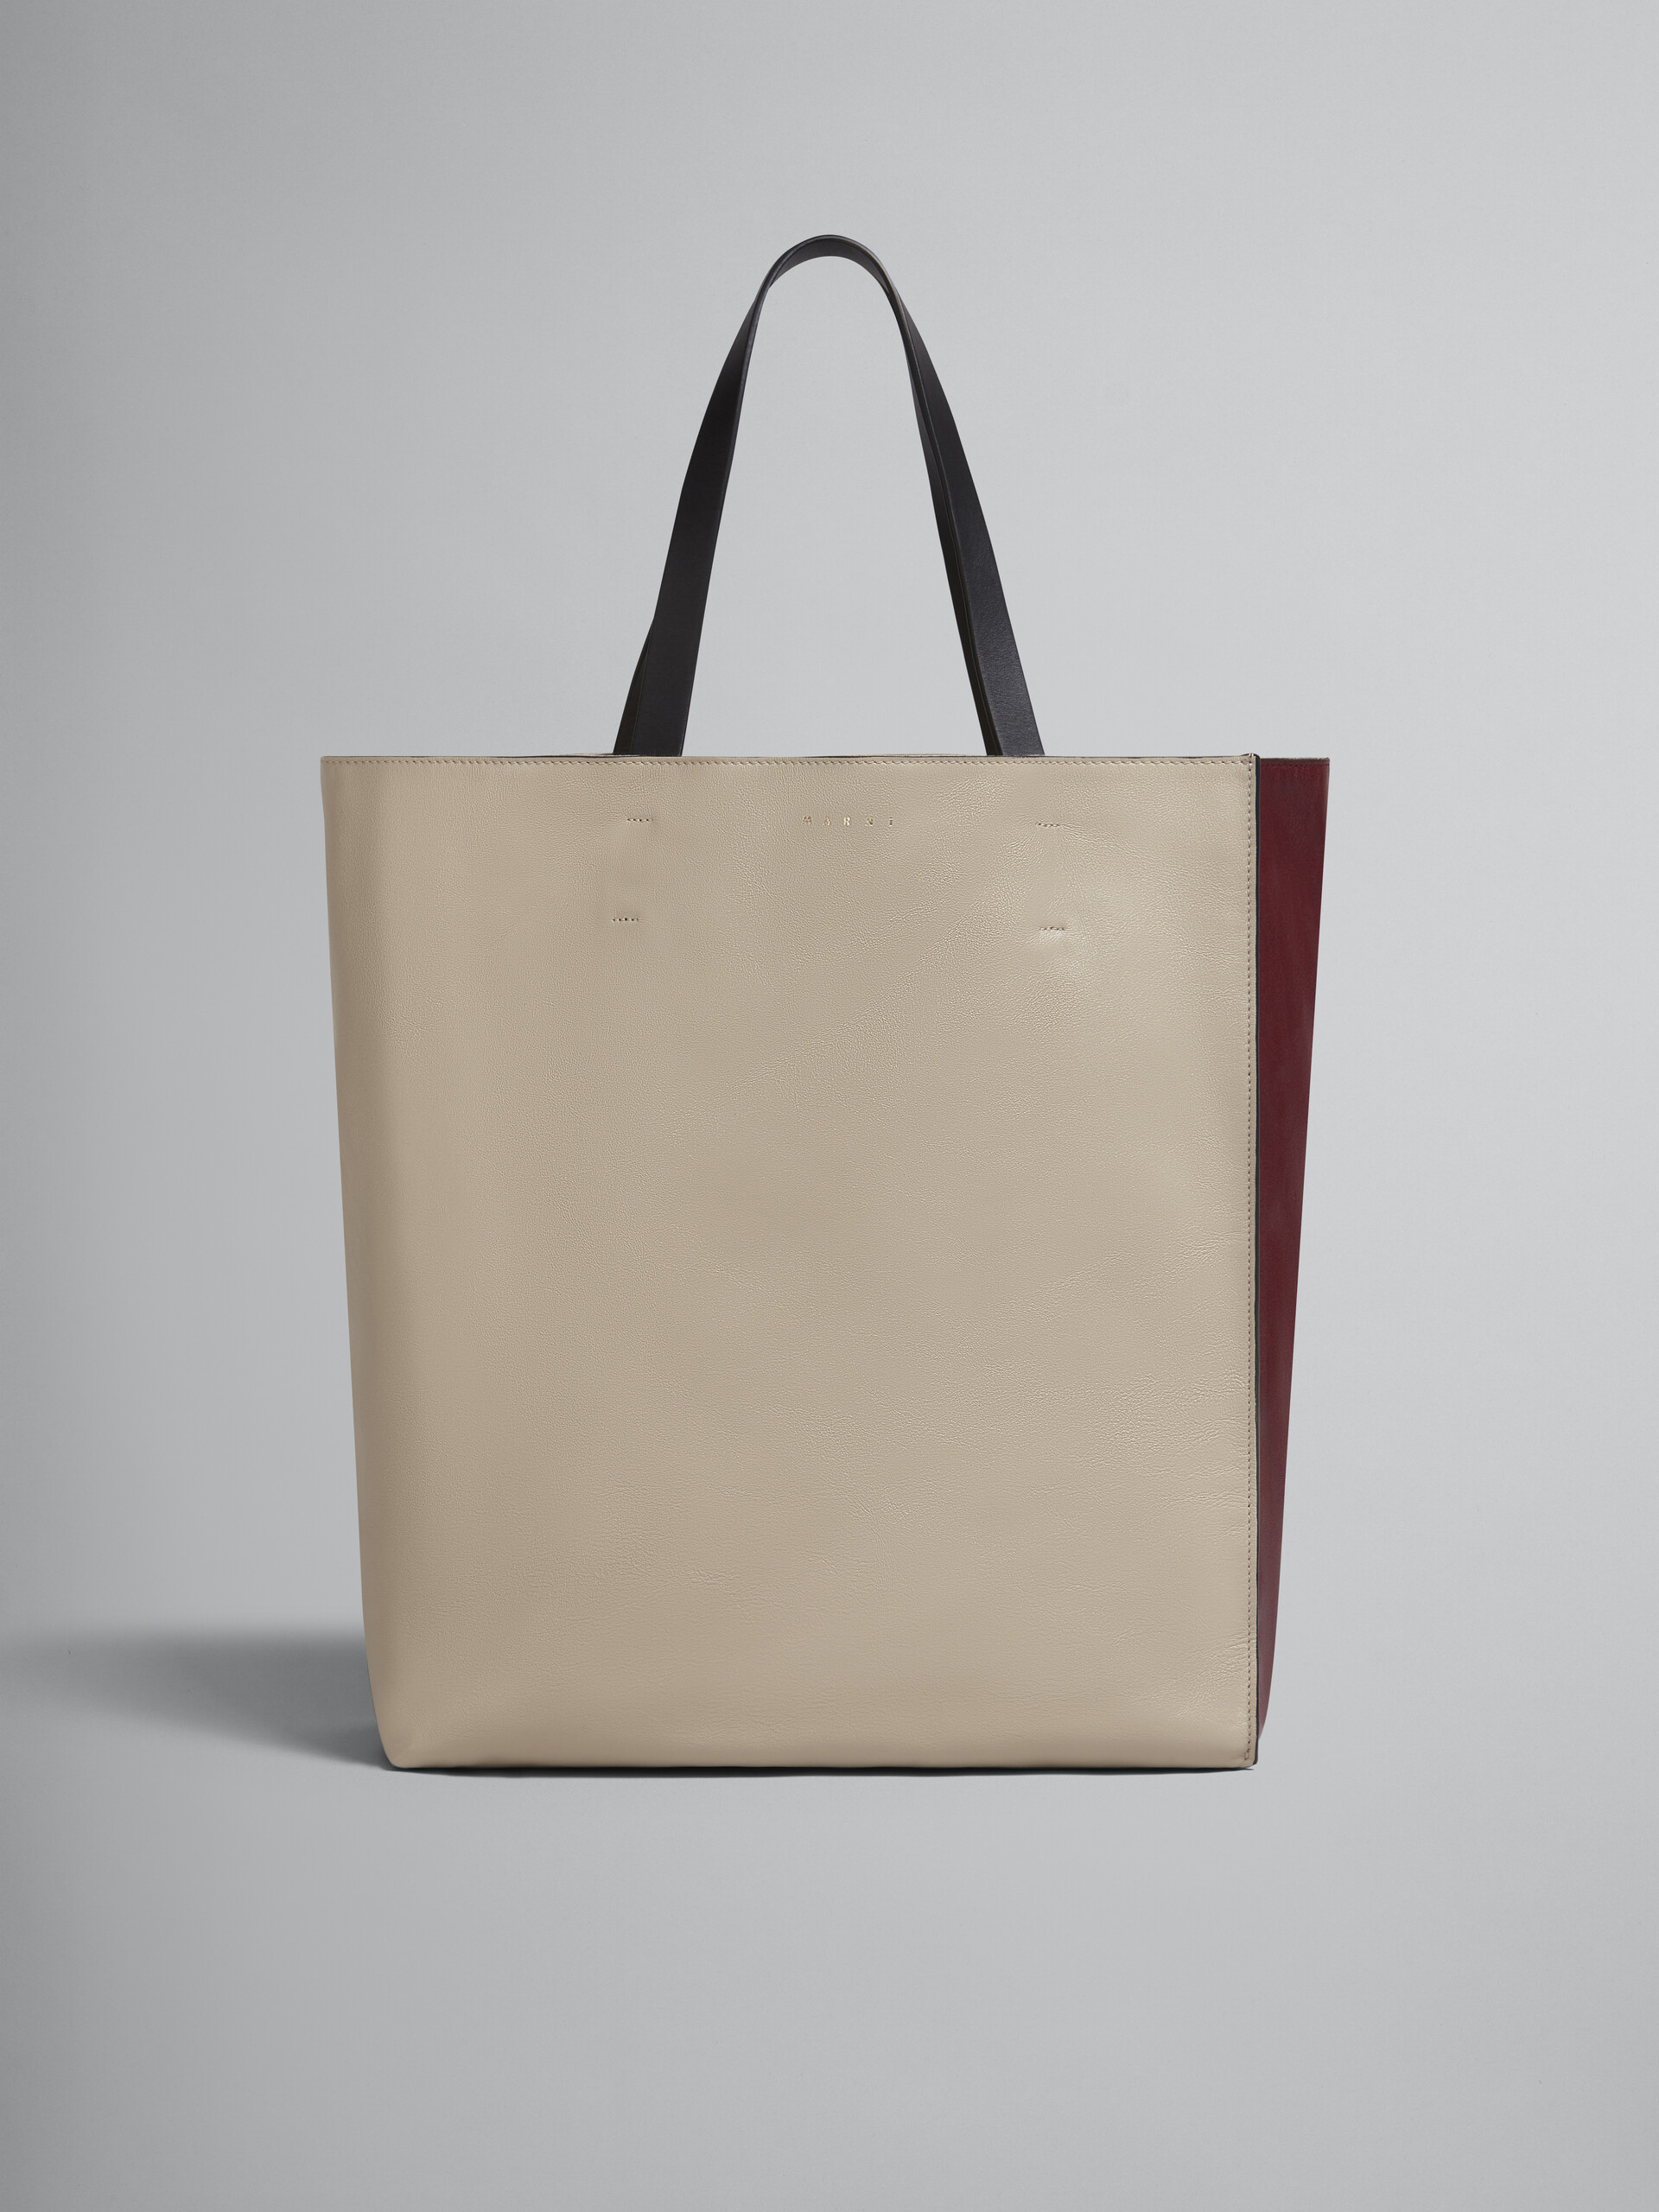 MUSEO SOFT large bag in white and red leather - Shopping Bags - Image 1